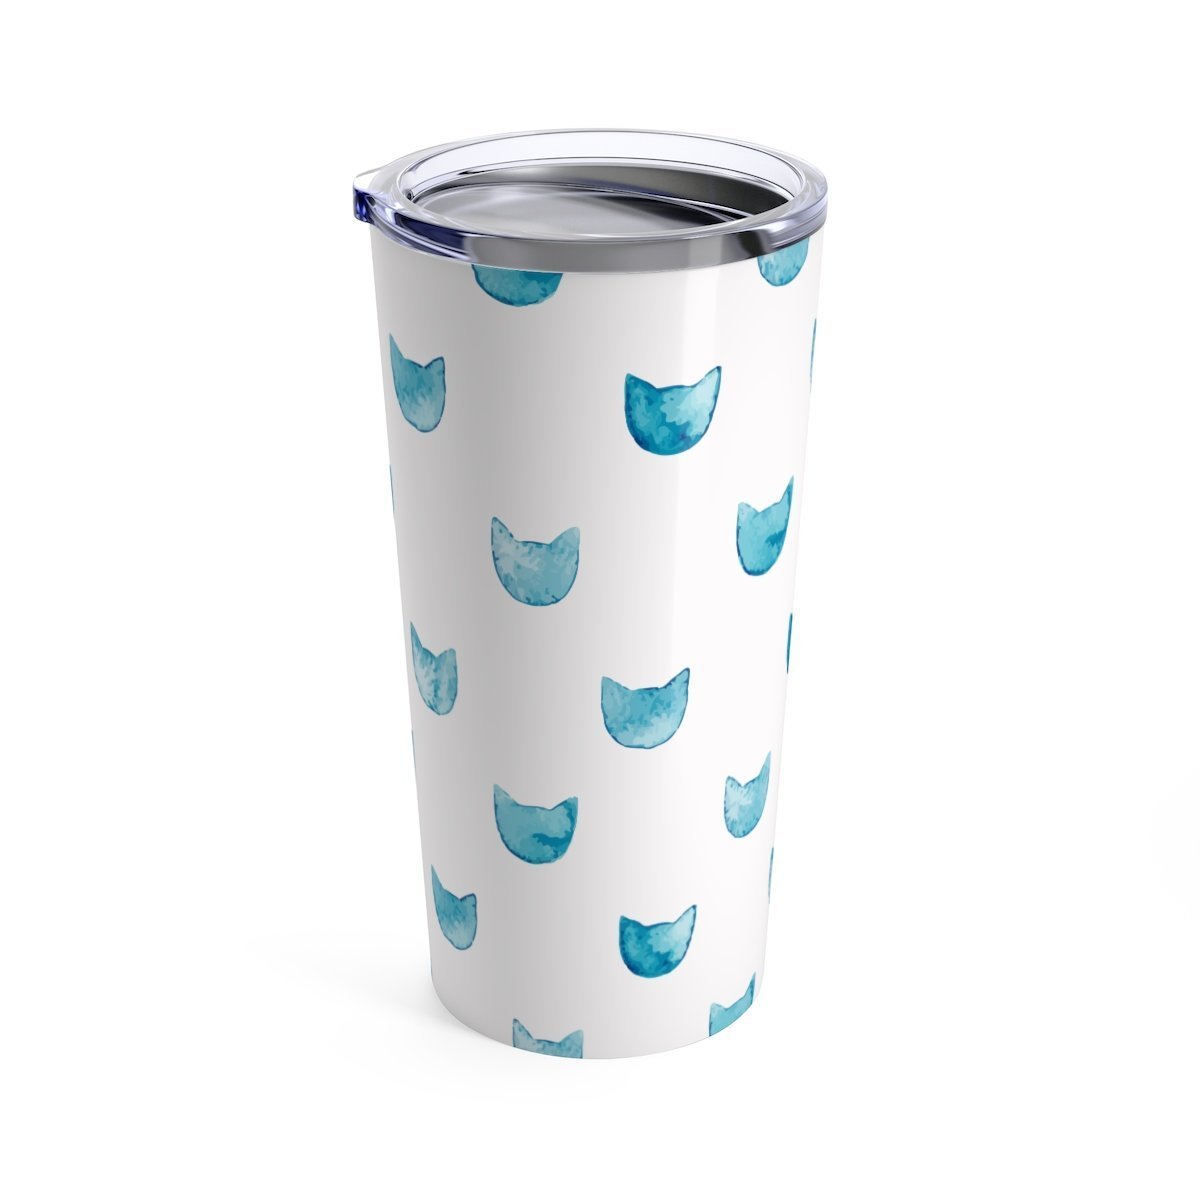 Unique Gifts for Cat Lovers, Stainless Steel Cat Tumbler Printed with Blue Cat Faces